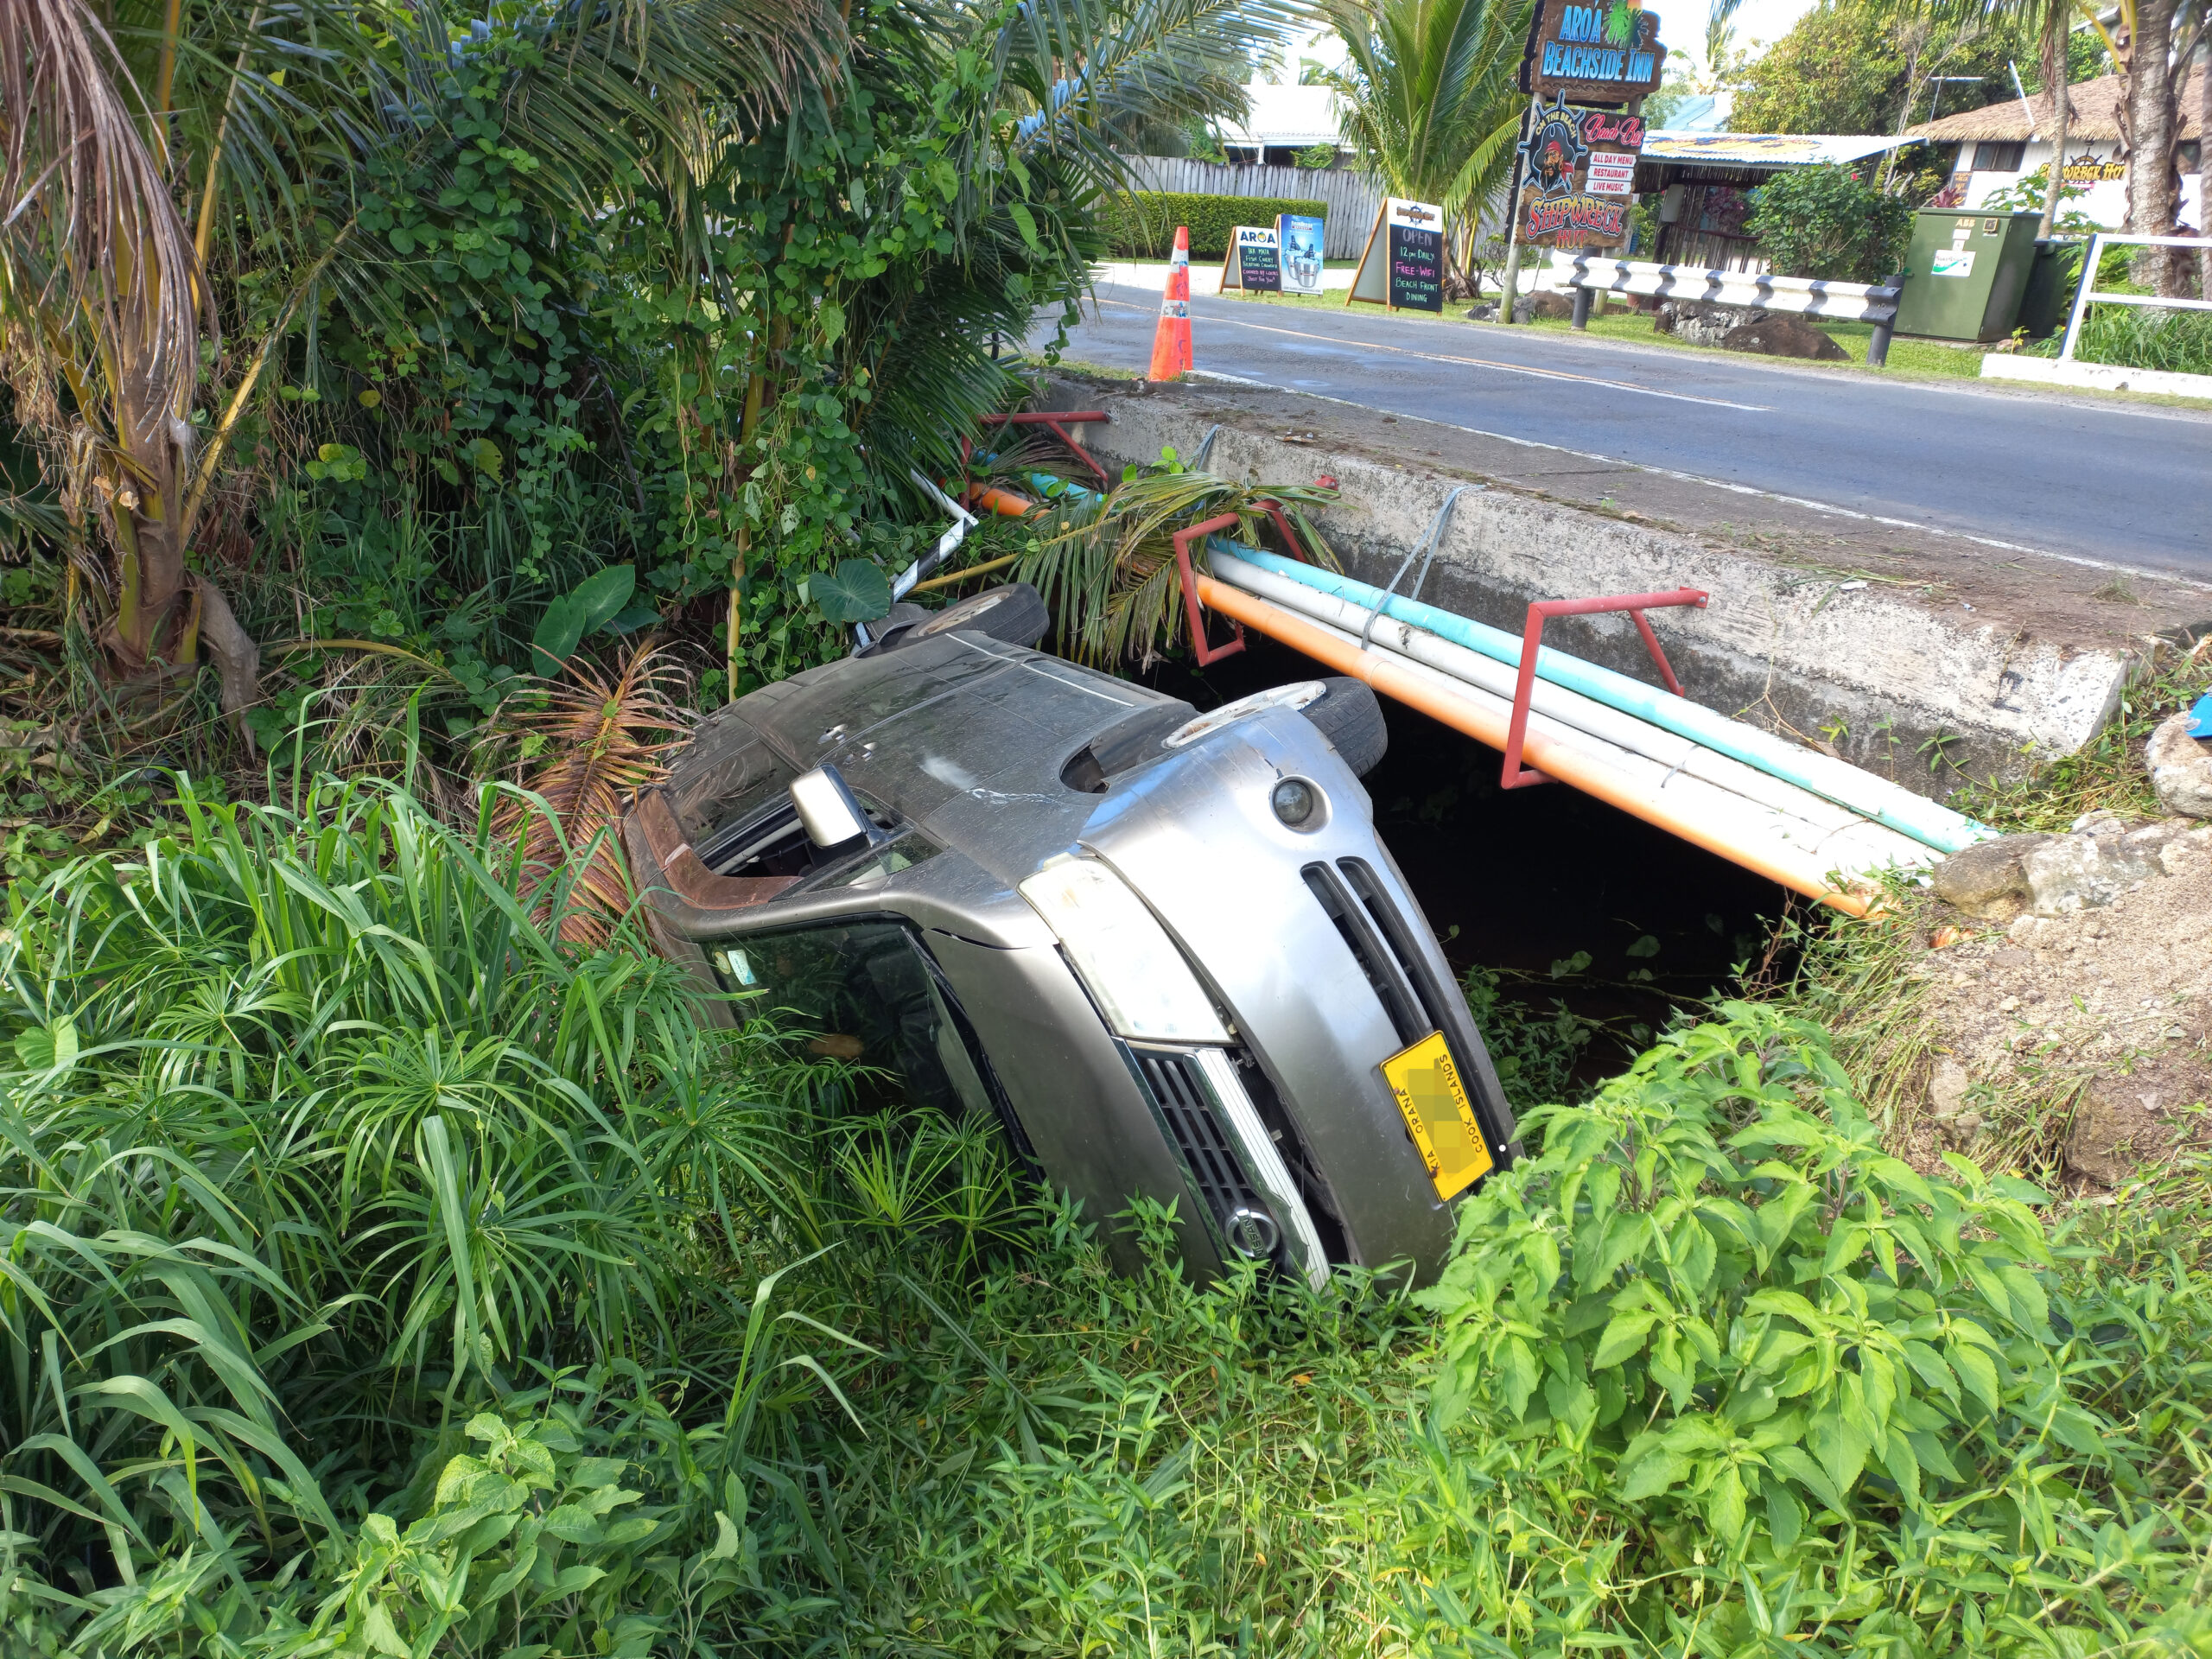 Lucky escape for driver after van plunges into stream